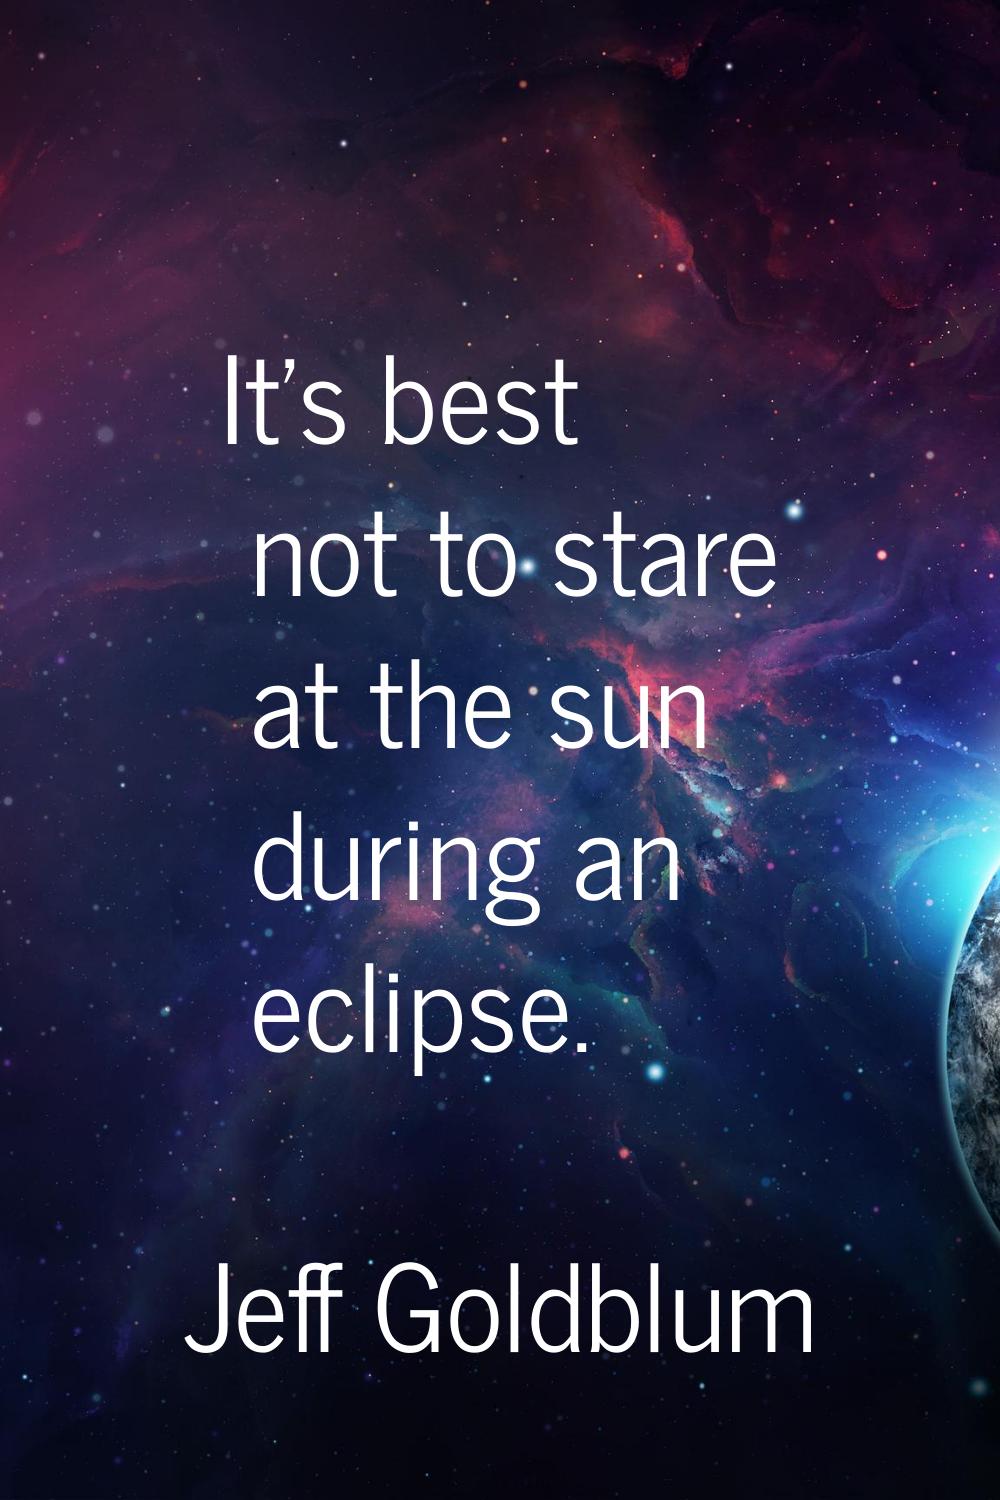 It's best not to stare at the sun during an eclipse.